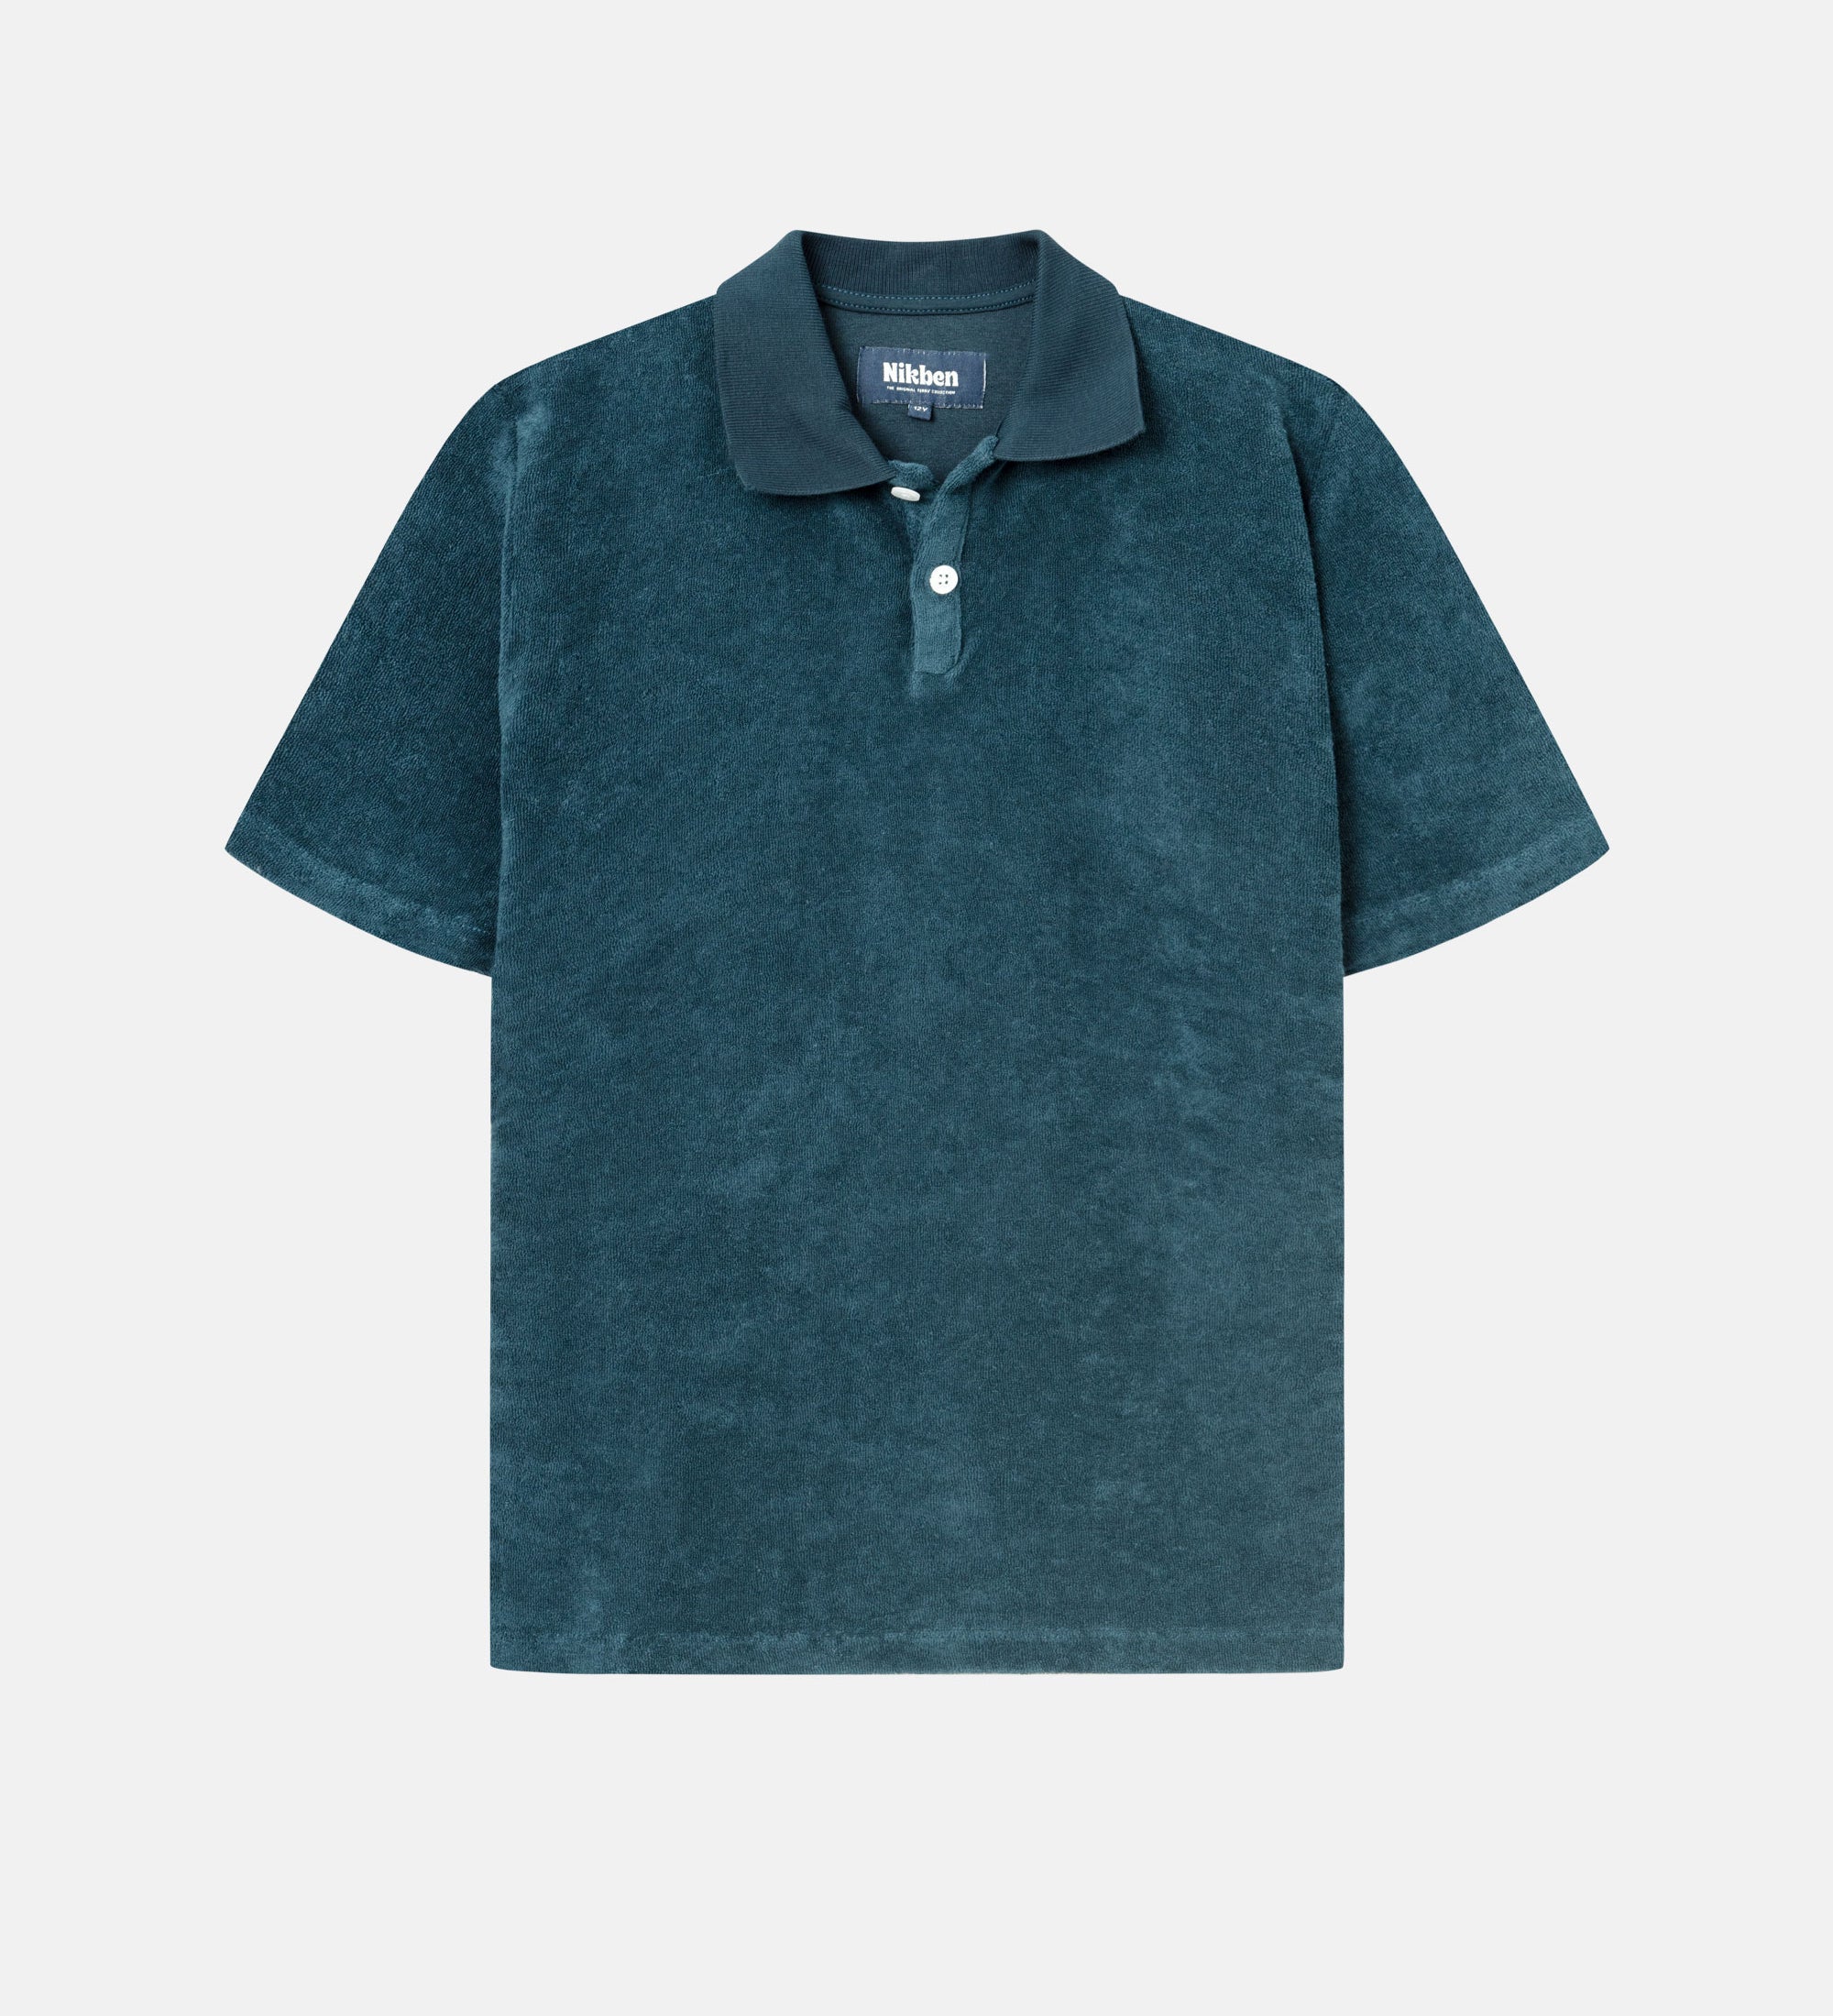 Dark blue short sleeve piké shirt for kids in terry toweling fabric.